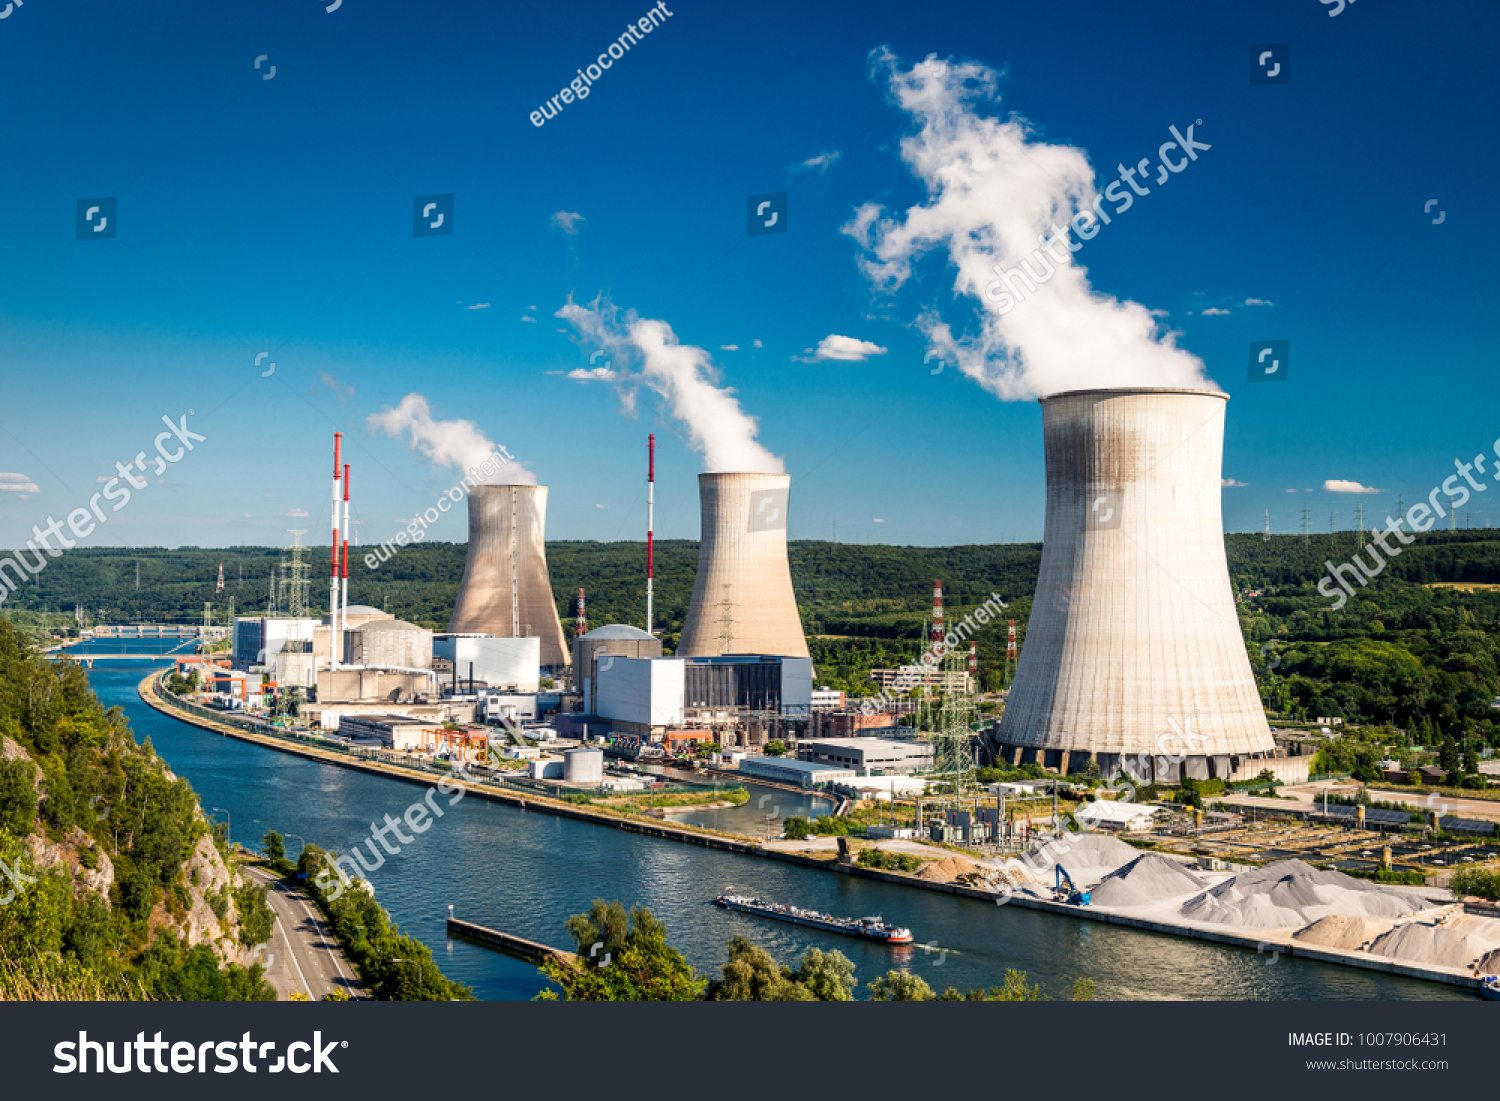 Tihange Nuclear Power Station in Belgium #1007906431